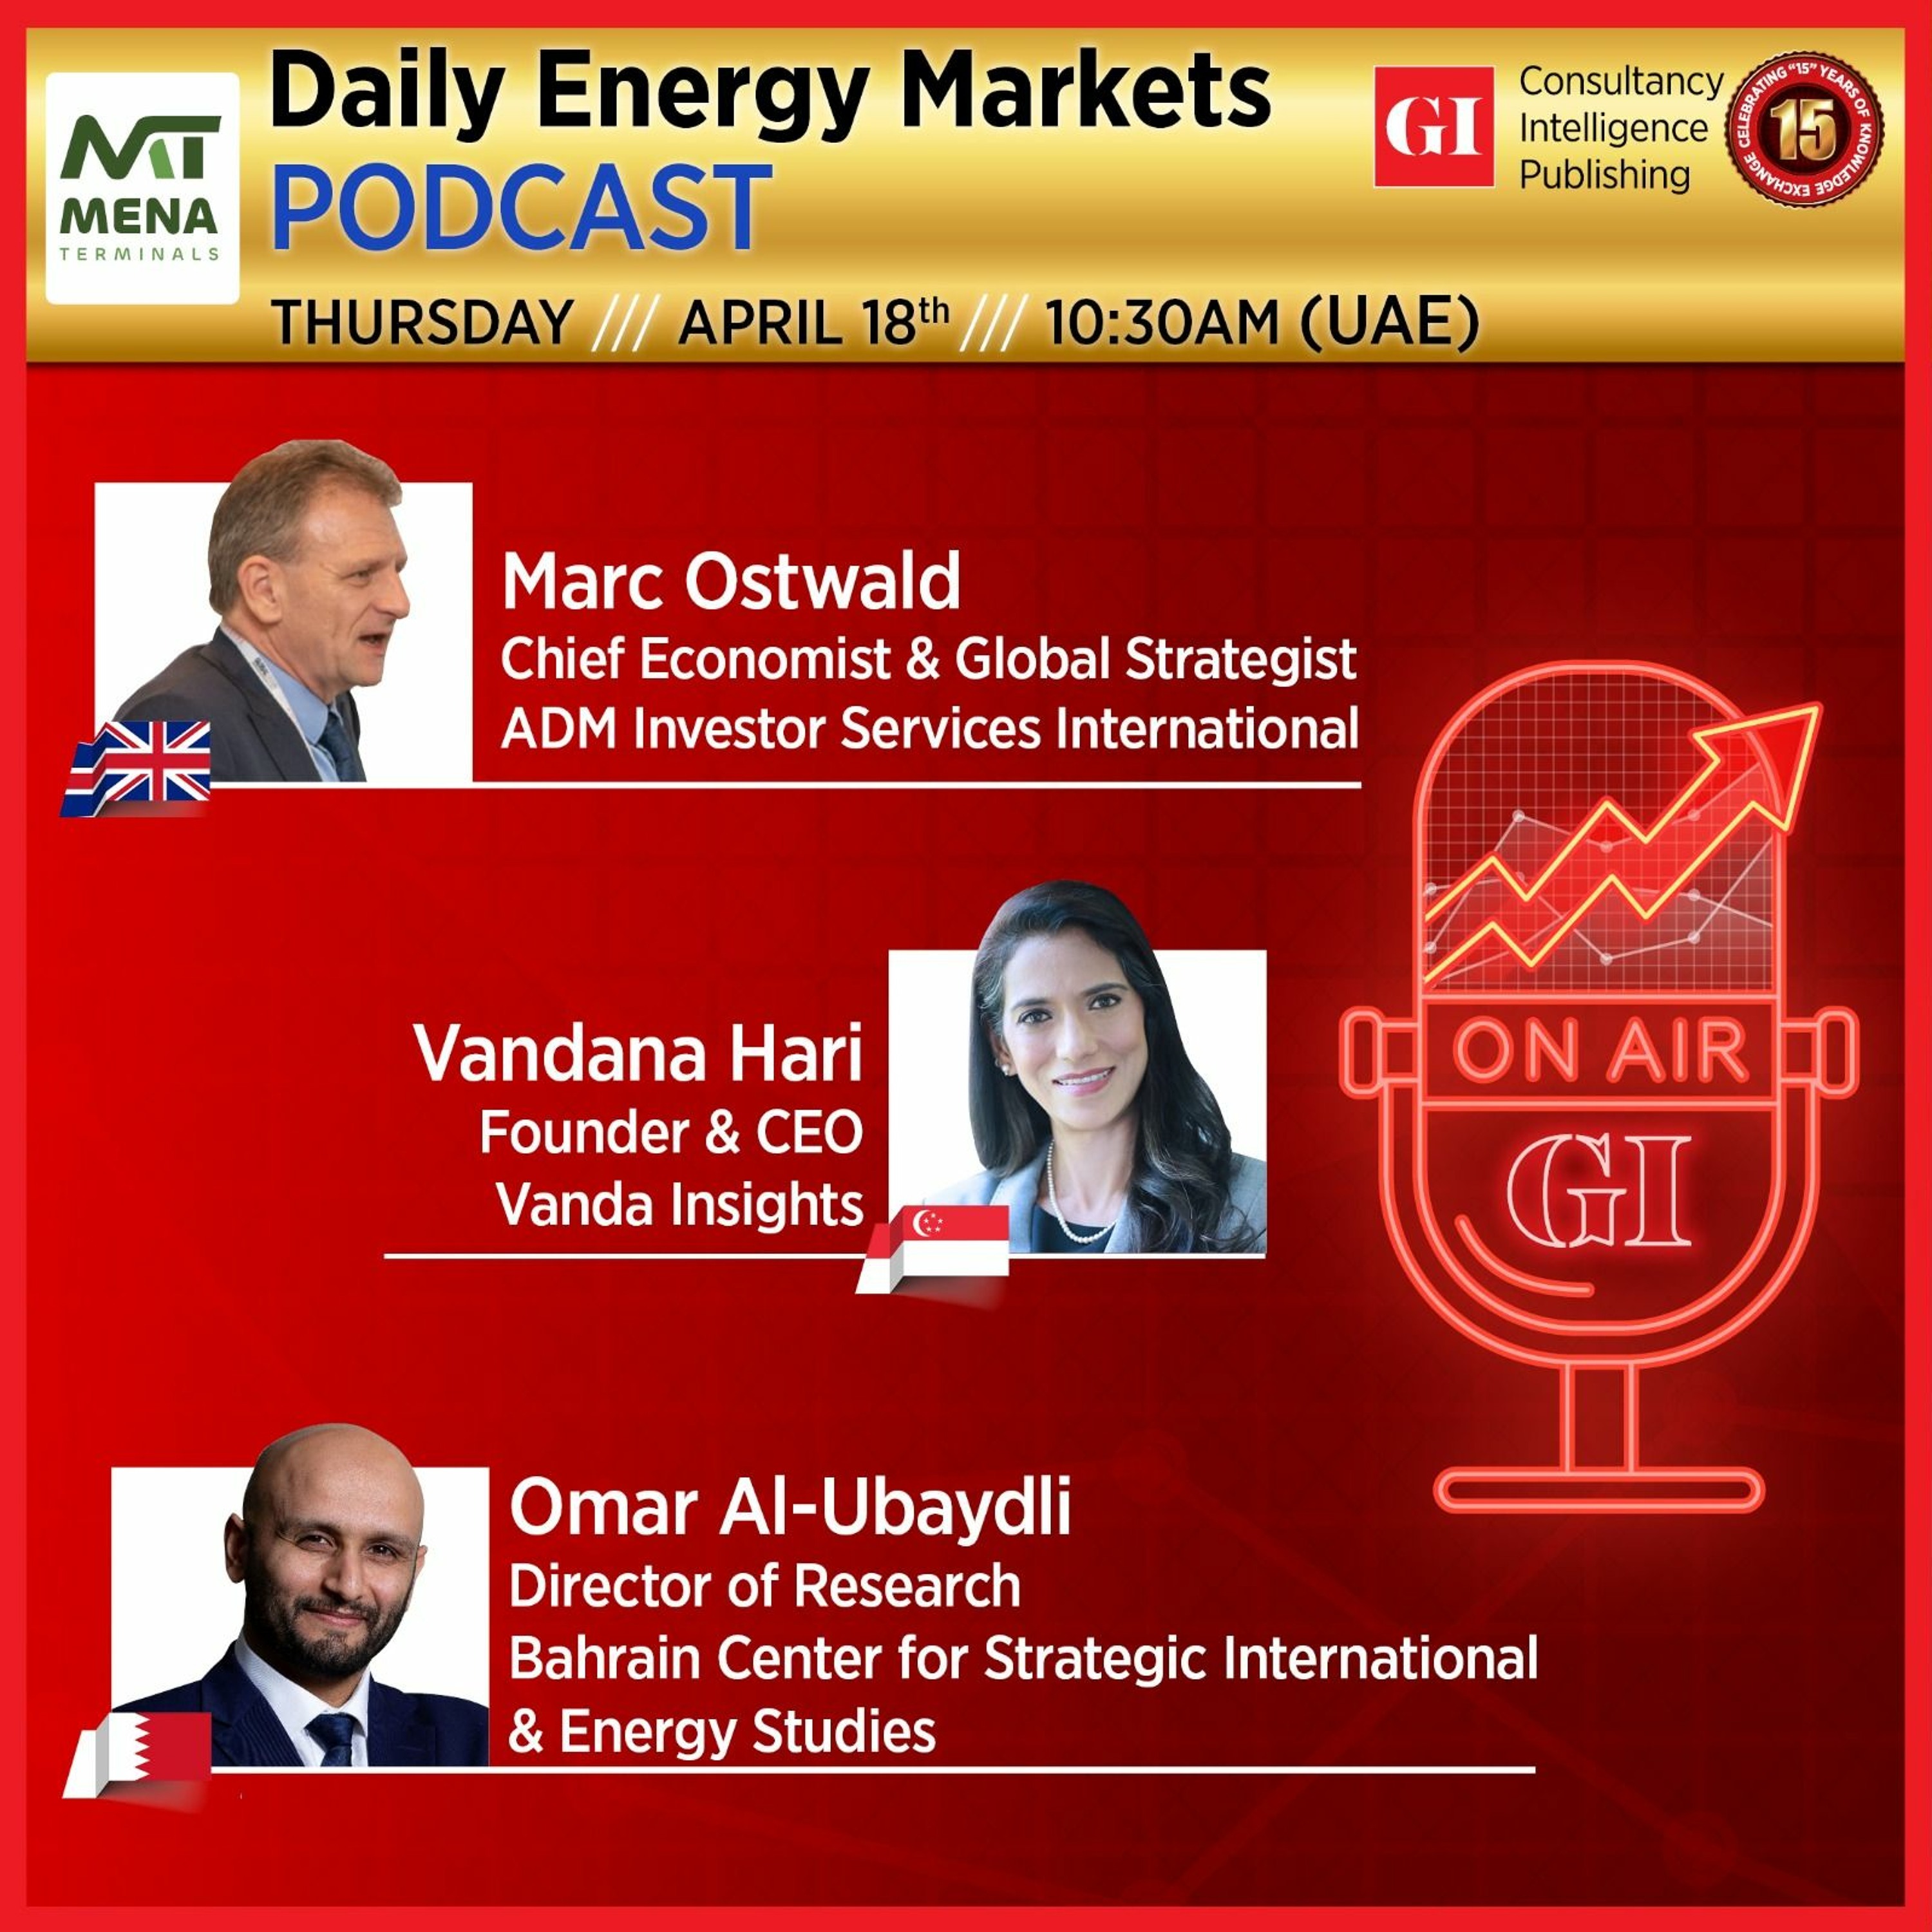 PODCAST: Daily Energy Markets - April 18th